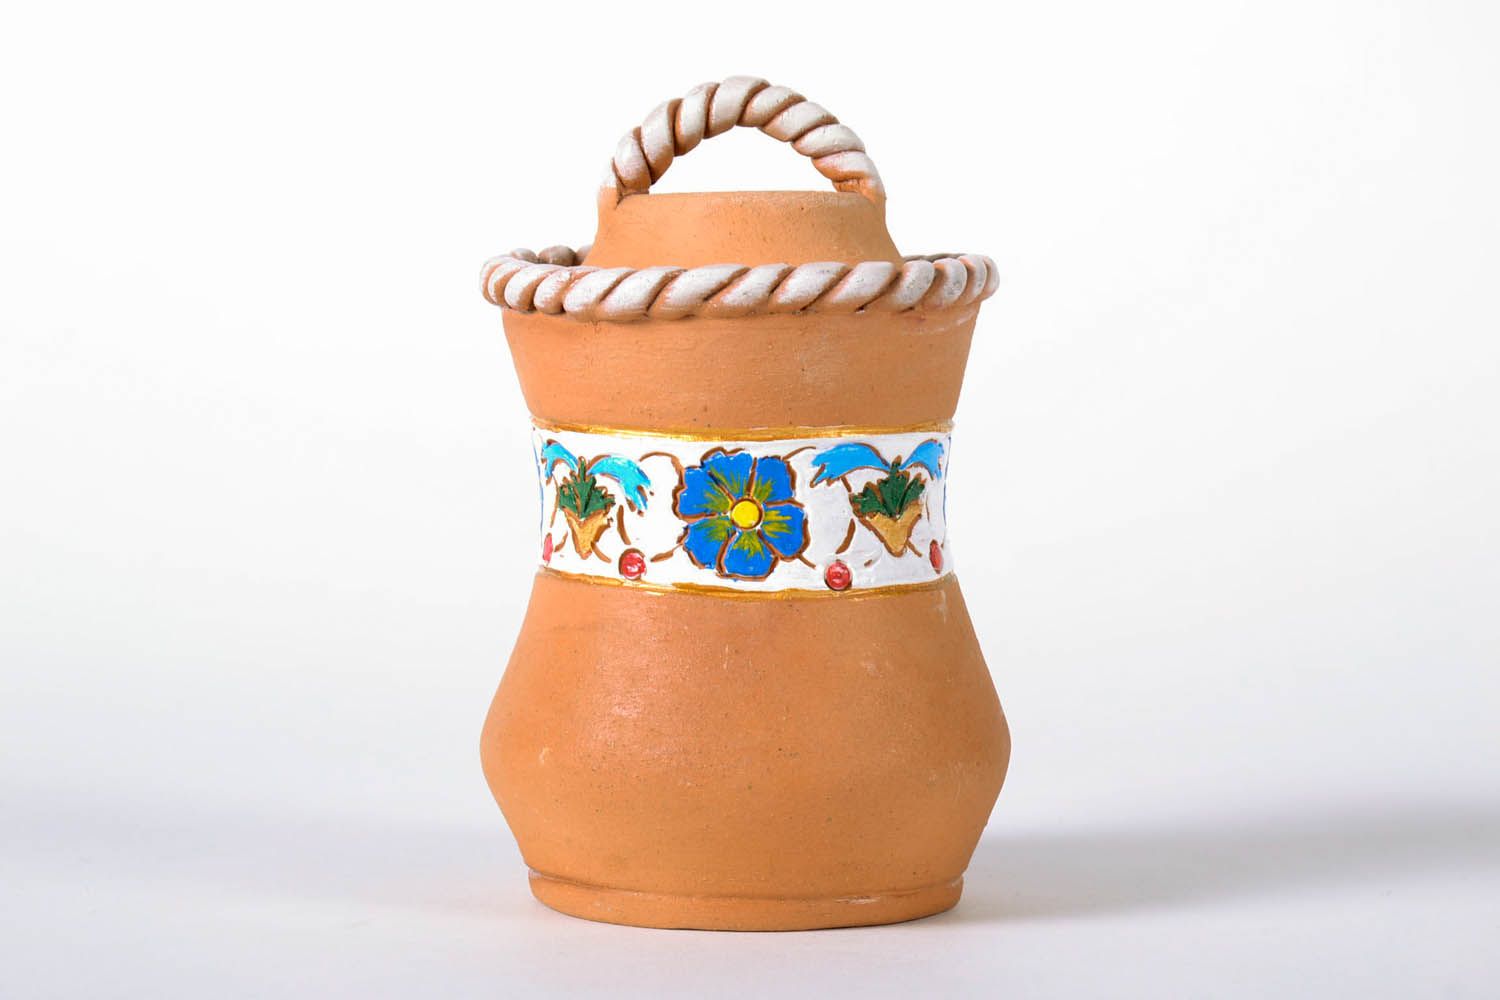 12 oz clay glazed jar with molded pattern and floral design in terracotta color 0,9 lb photo 2